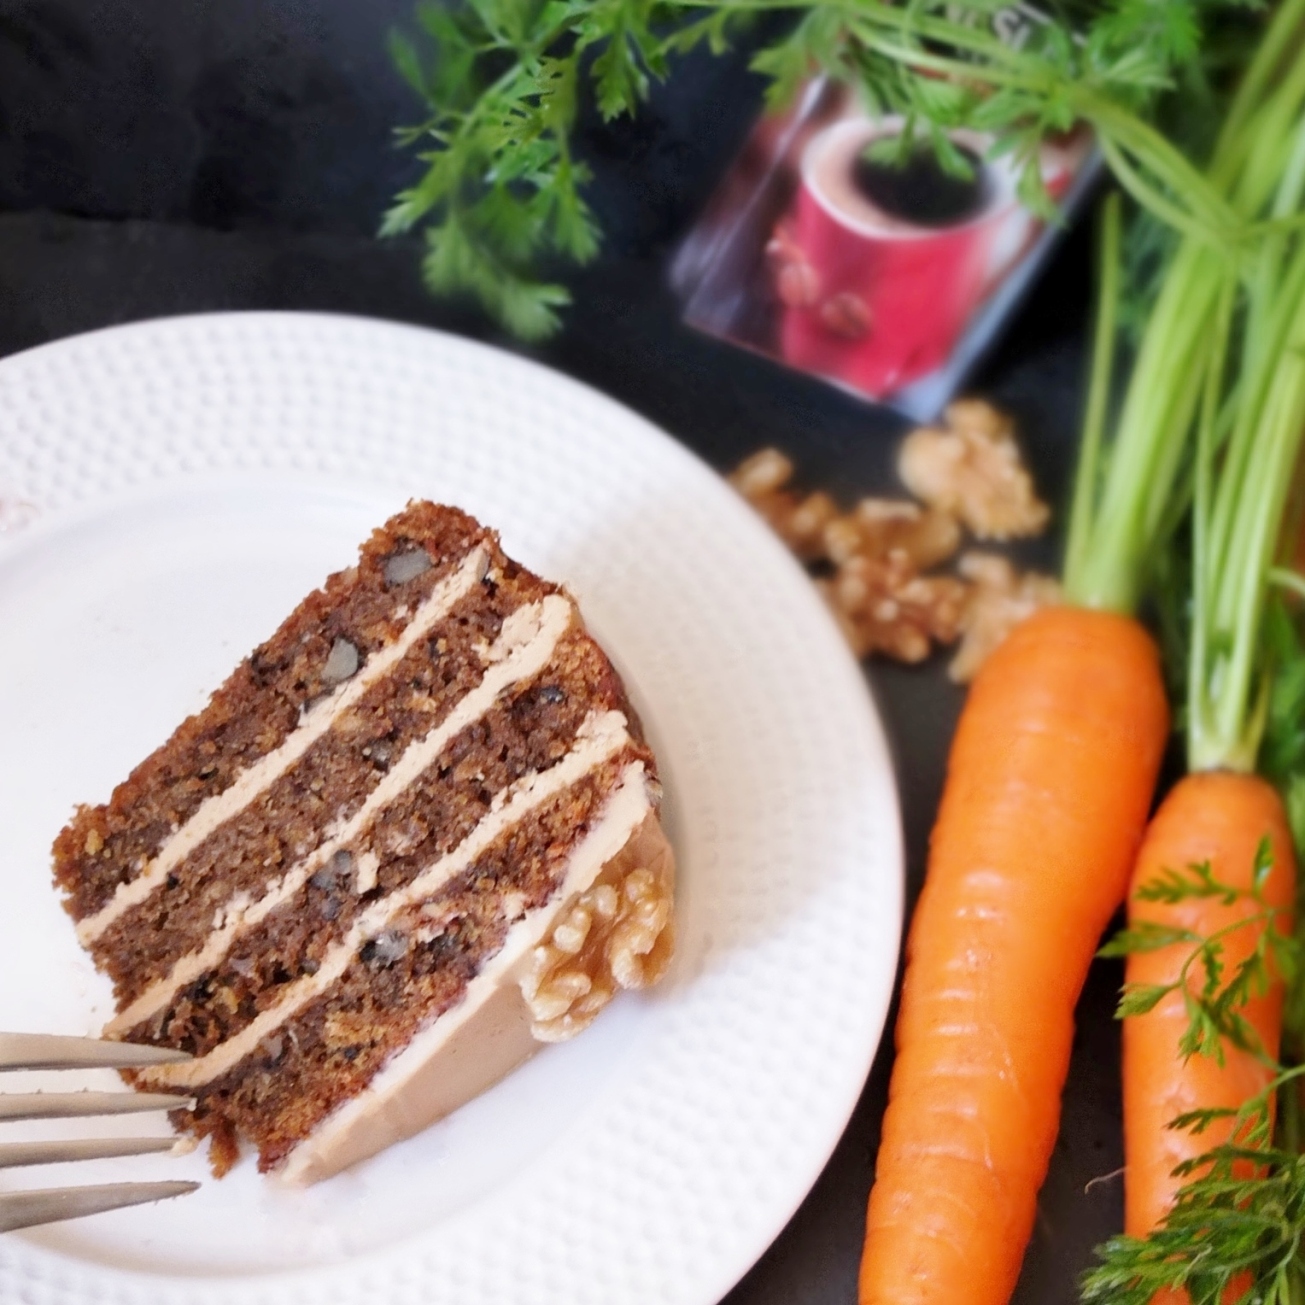 Coffee and walnut cake with carrot